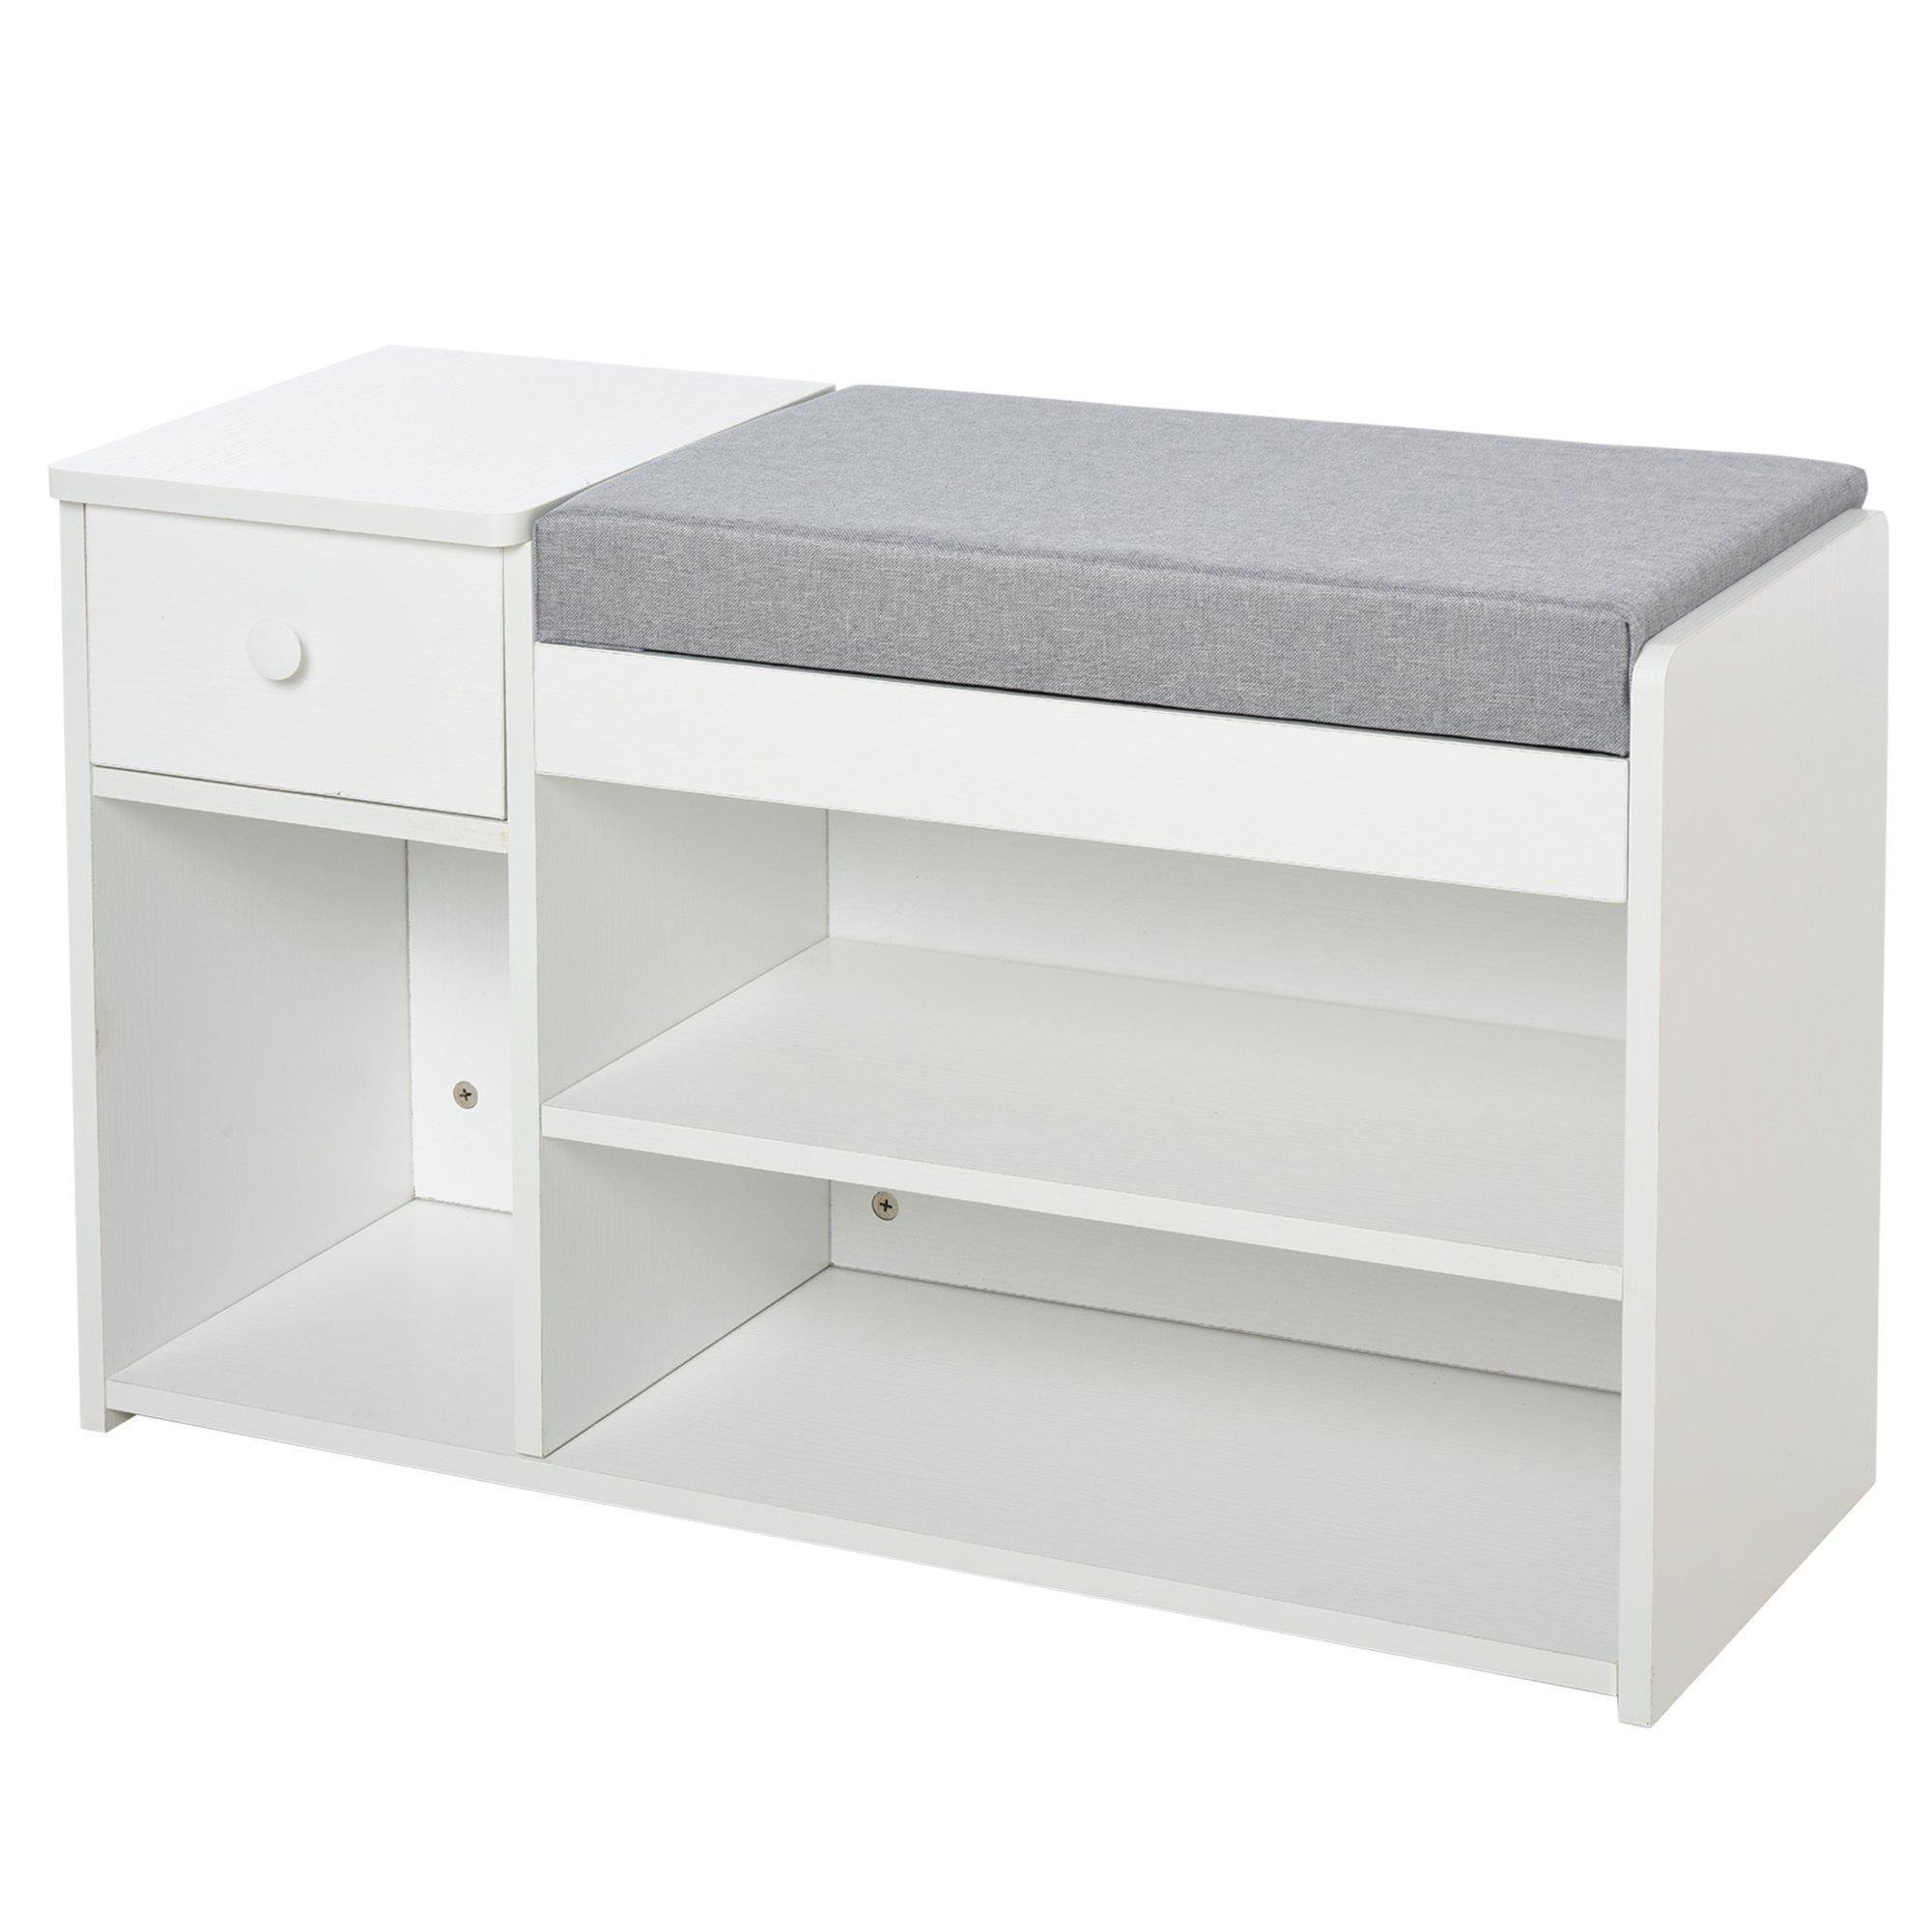 Shoe Storage Bench with Drawer 3 Compartments Cushion Home - image 1